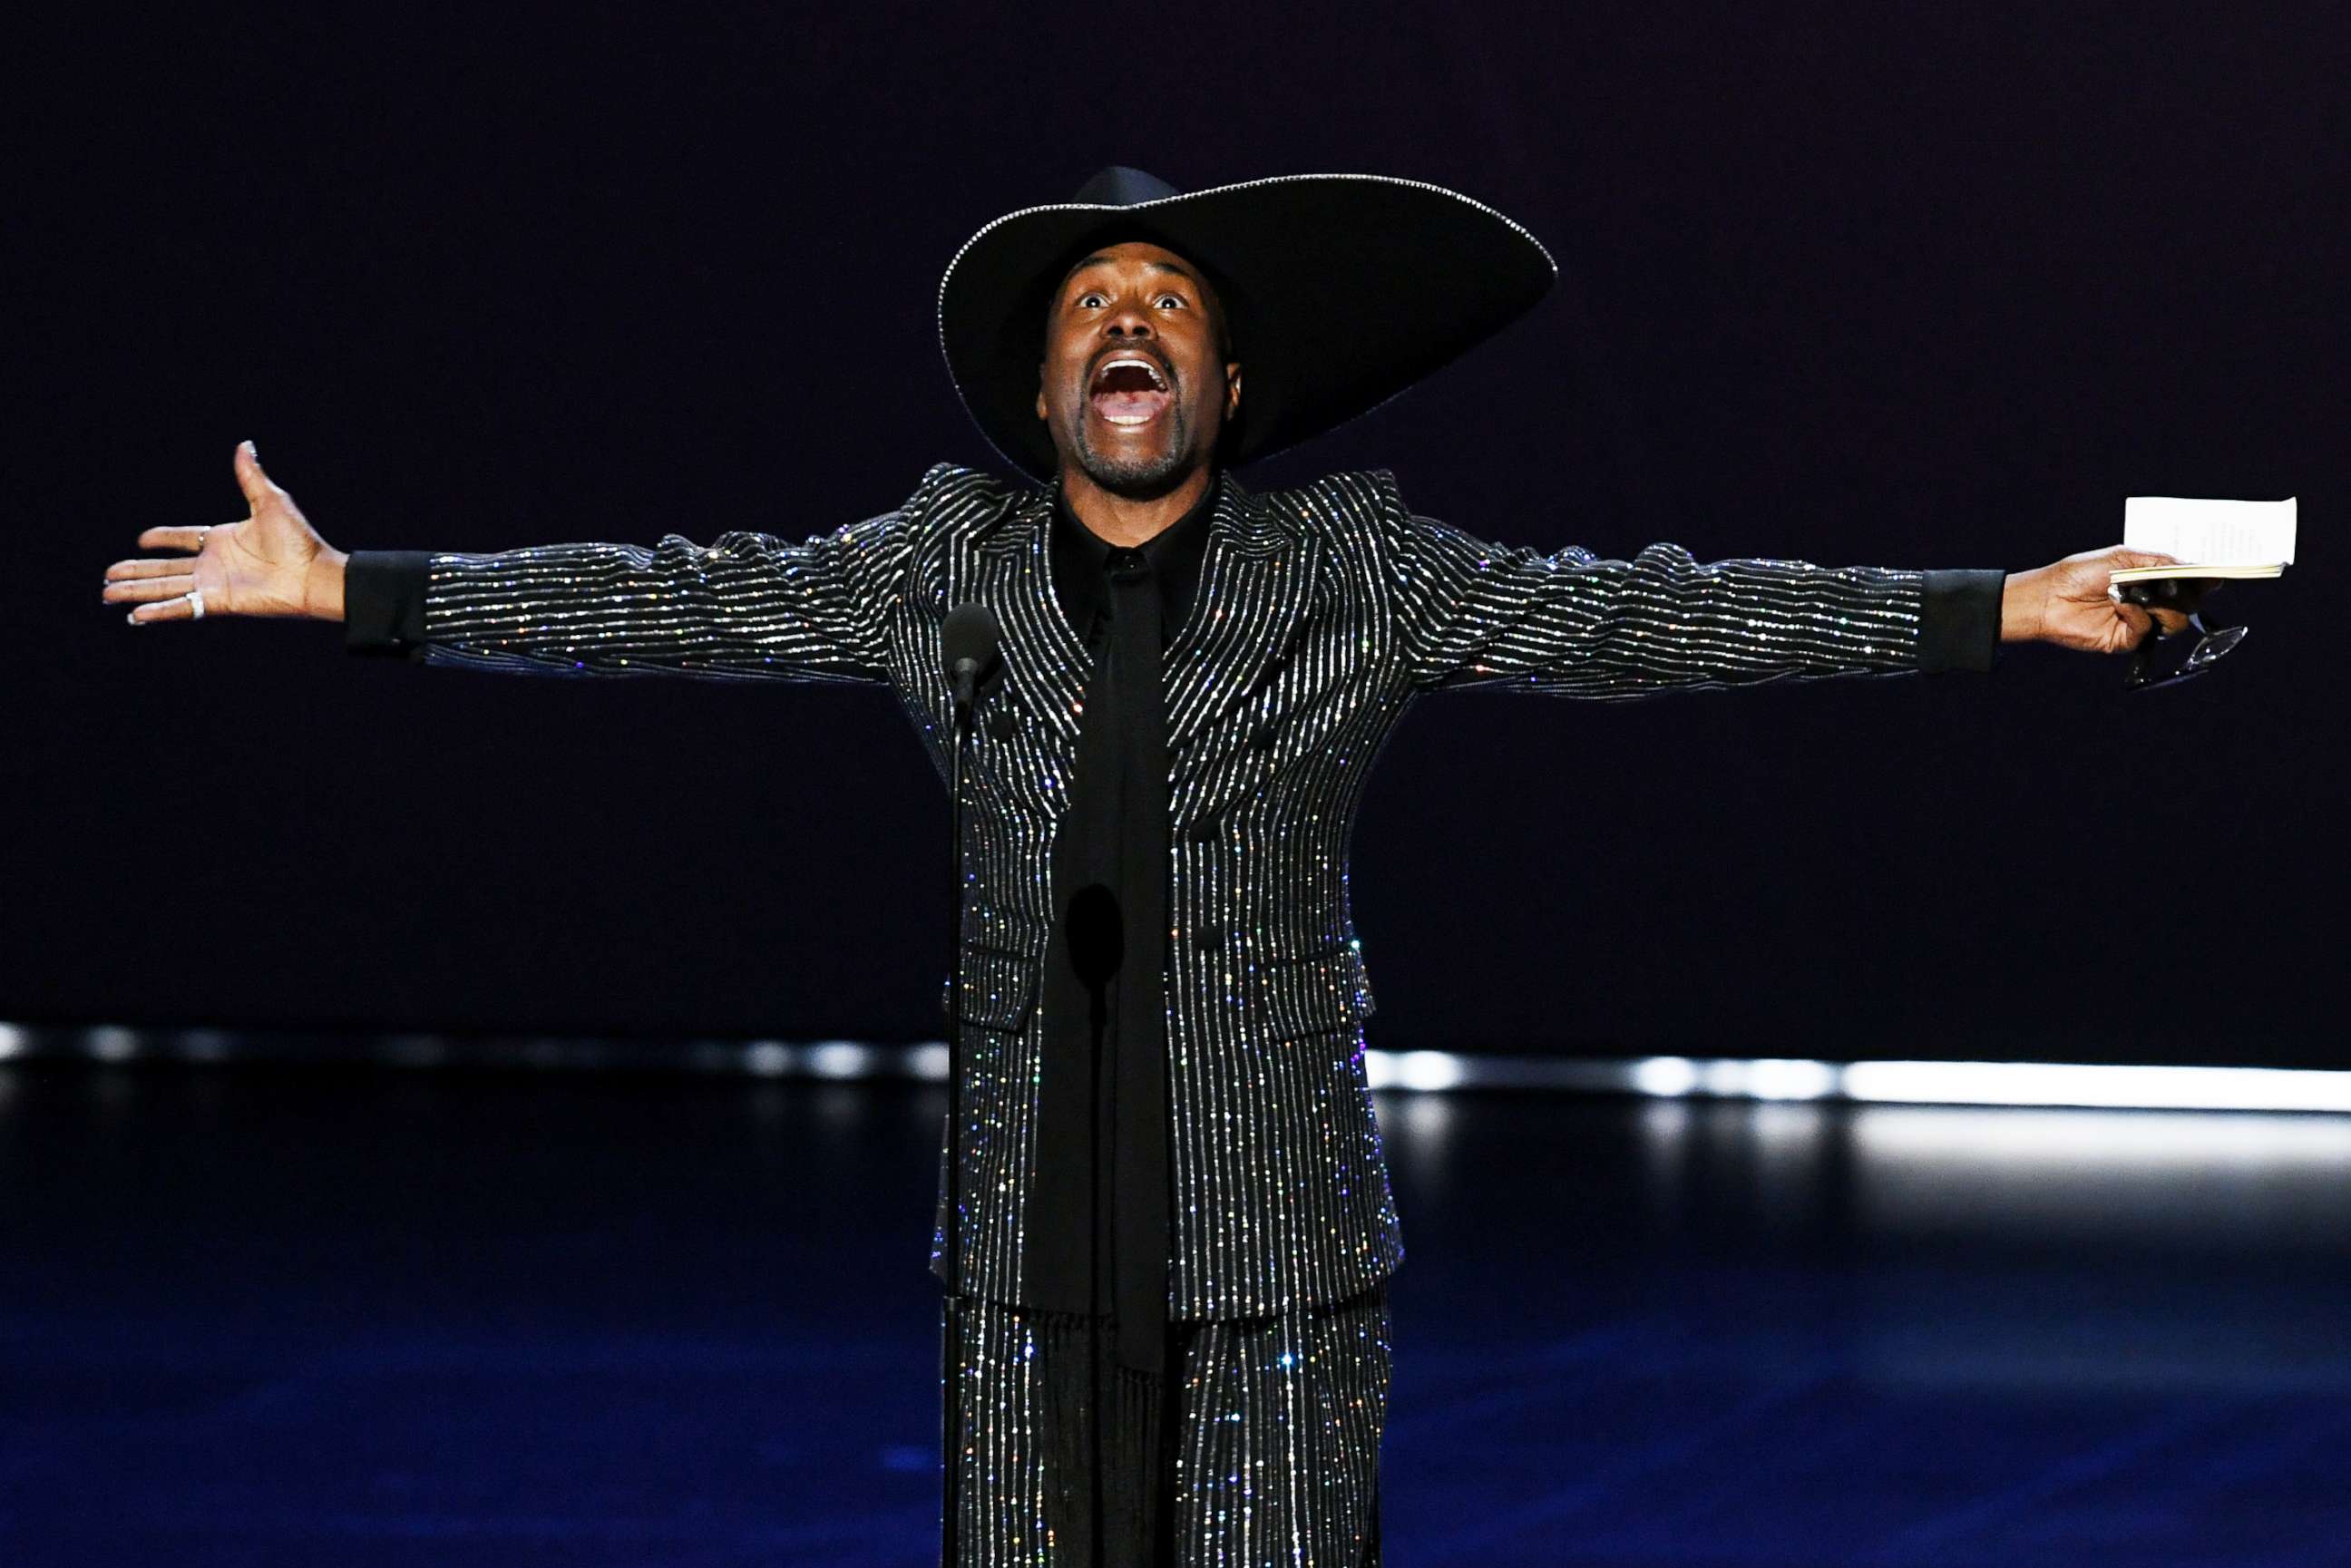 PHOTO: Billy Porter accepts the Outstanding Lead Actor in a Drama Series award for 'Pose' onstage during the 71st Emmy Awards at Microsoft Theater on September 22, 2019 in Los Angeles, California.